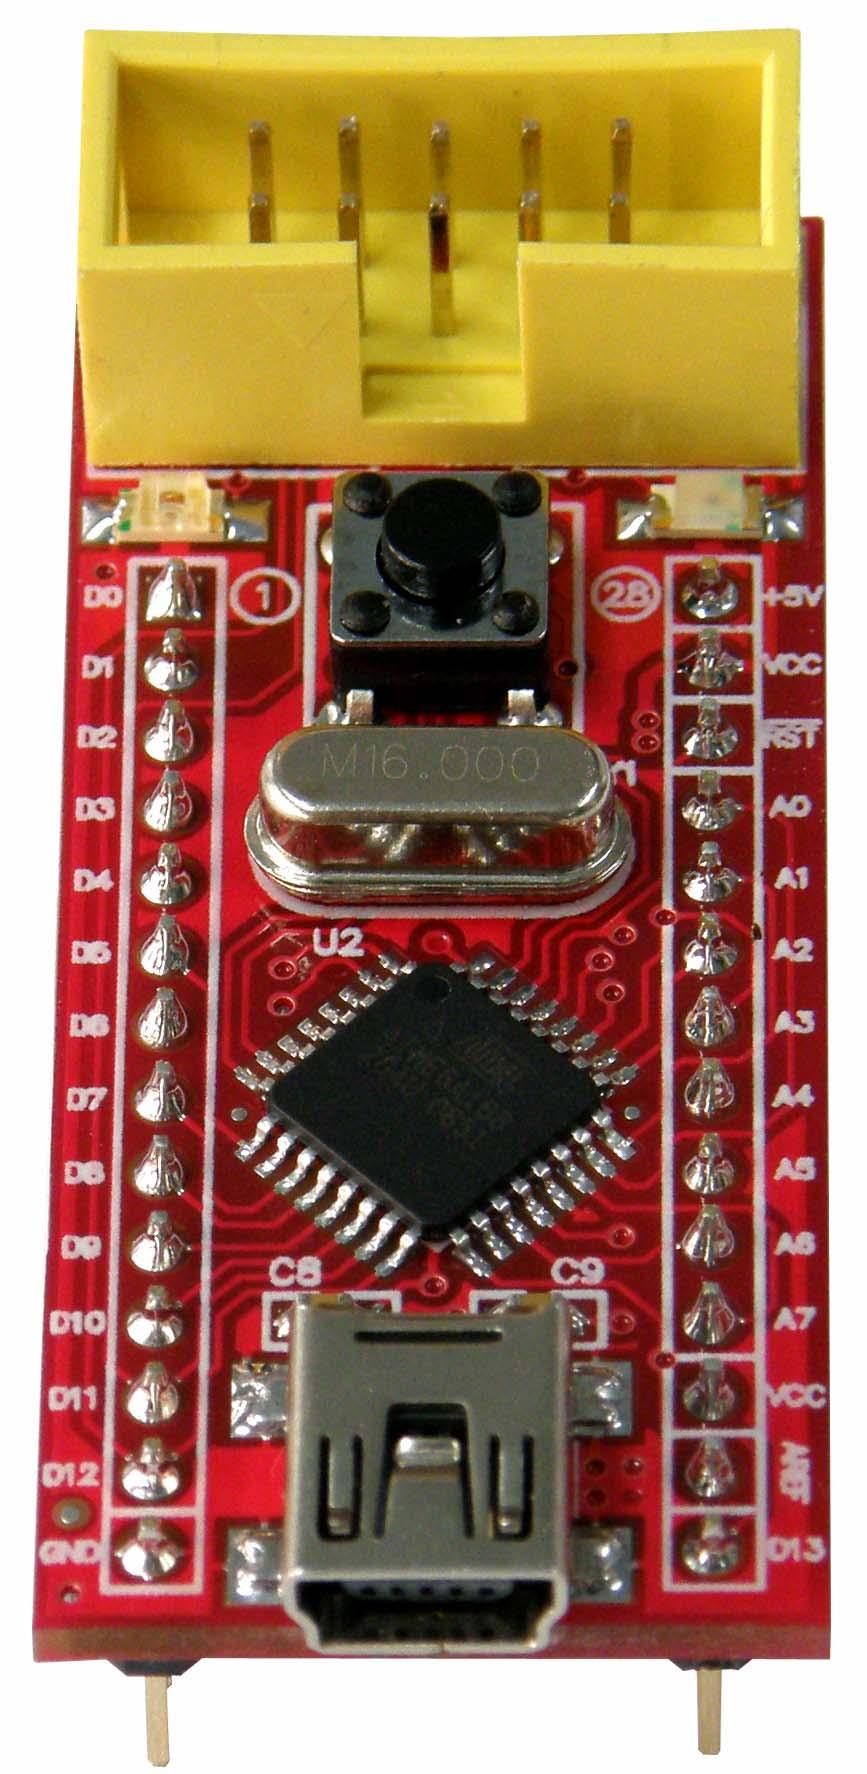 User s Manual of Board Micro Controller ET-EASY168 STAMP ET-EASY168 STAMP